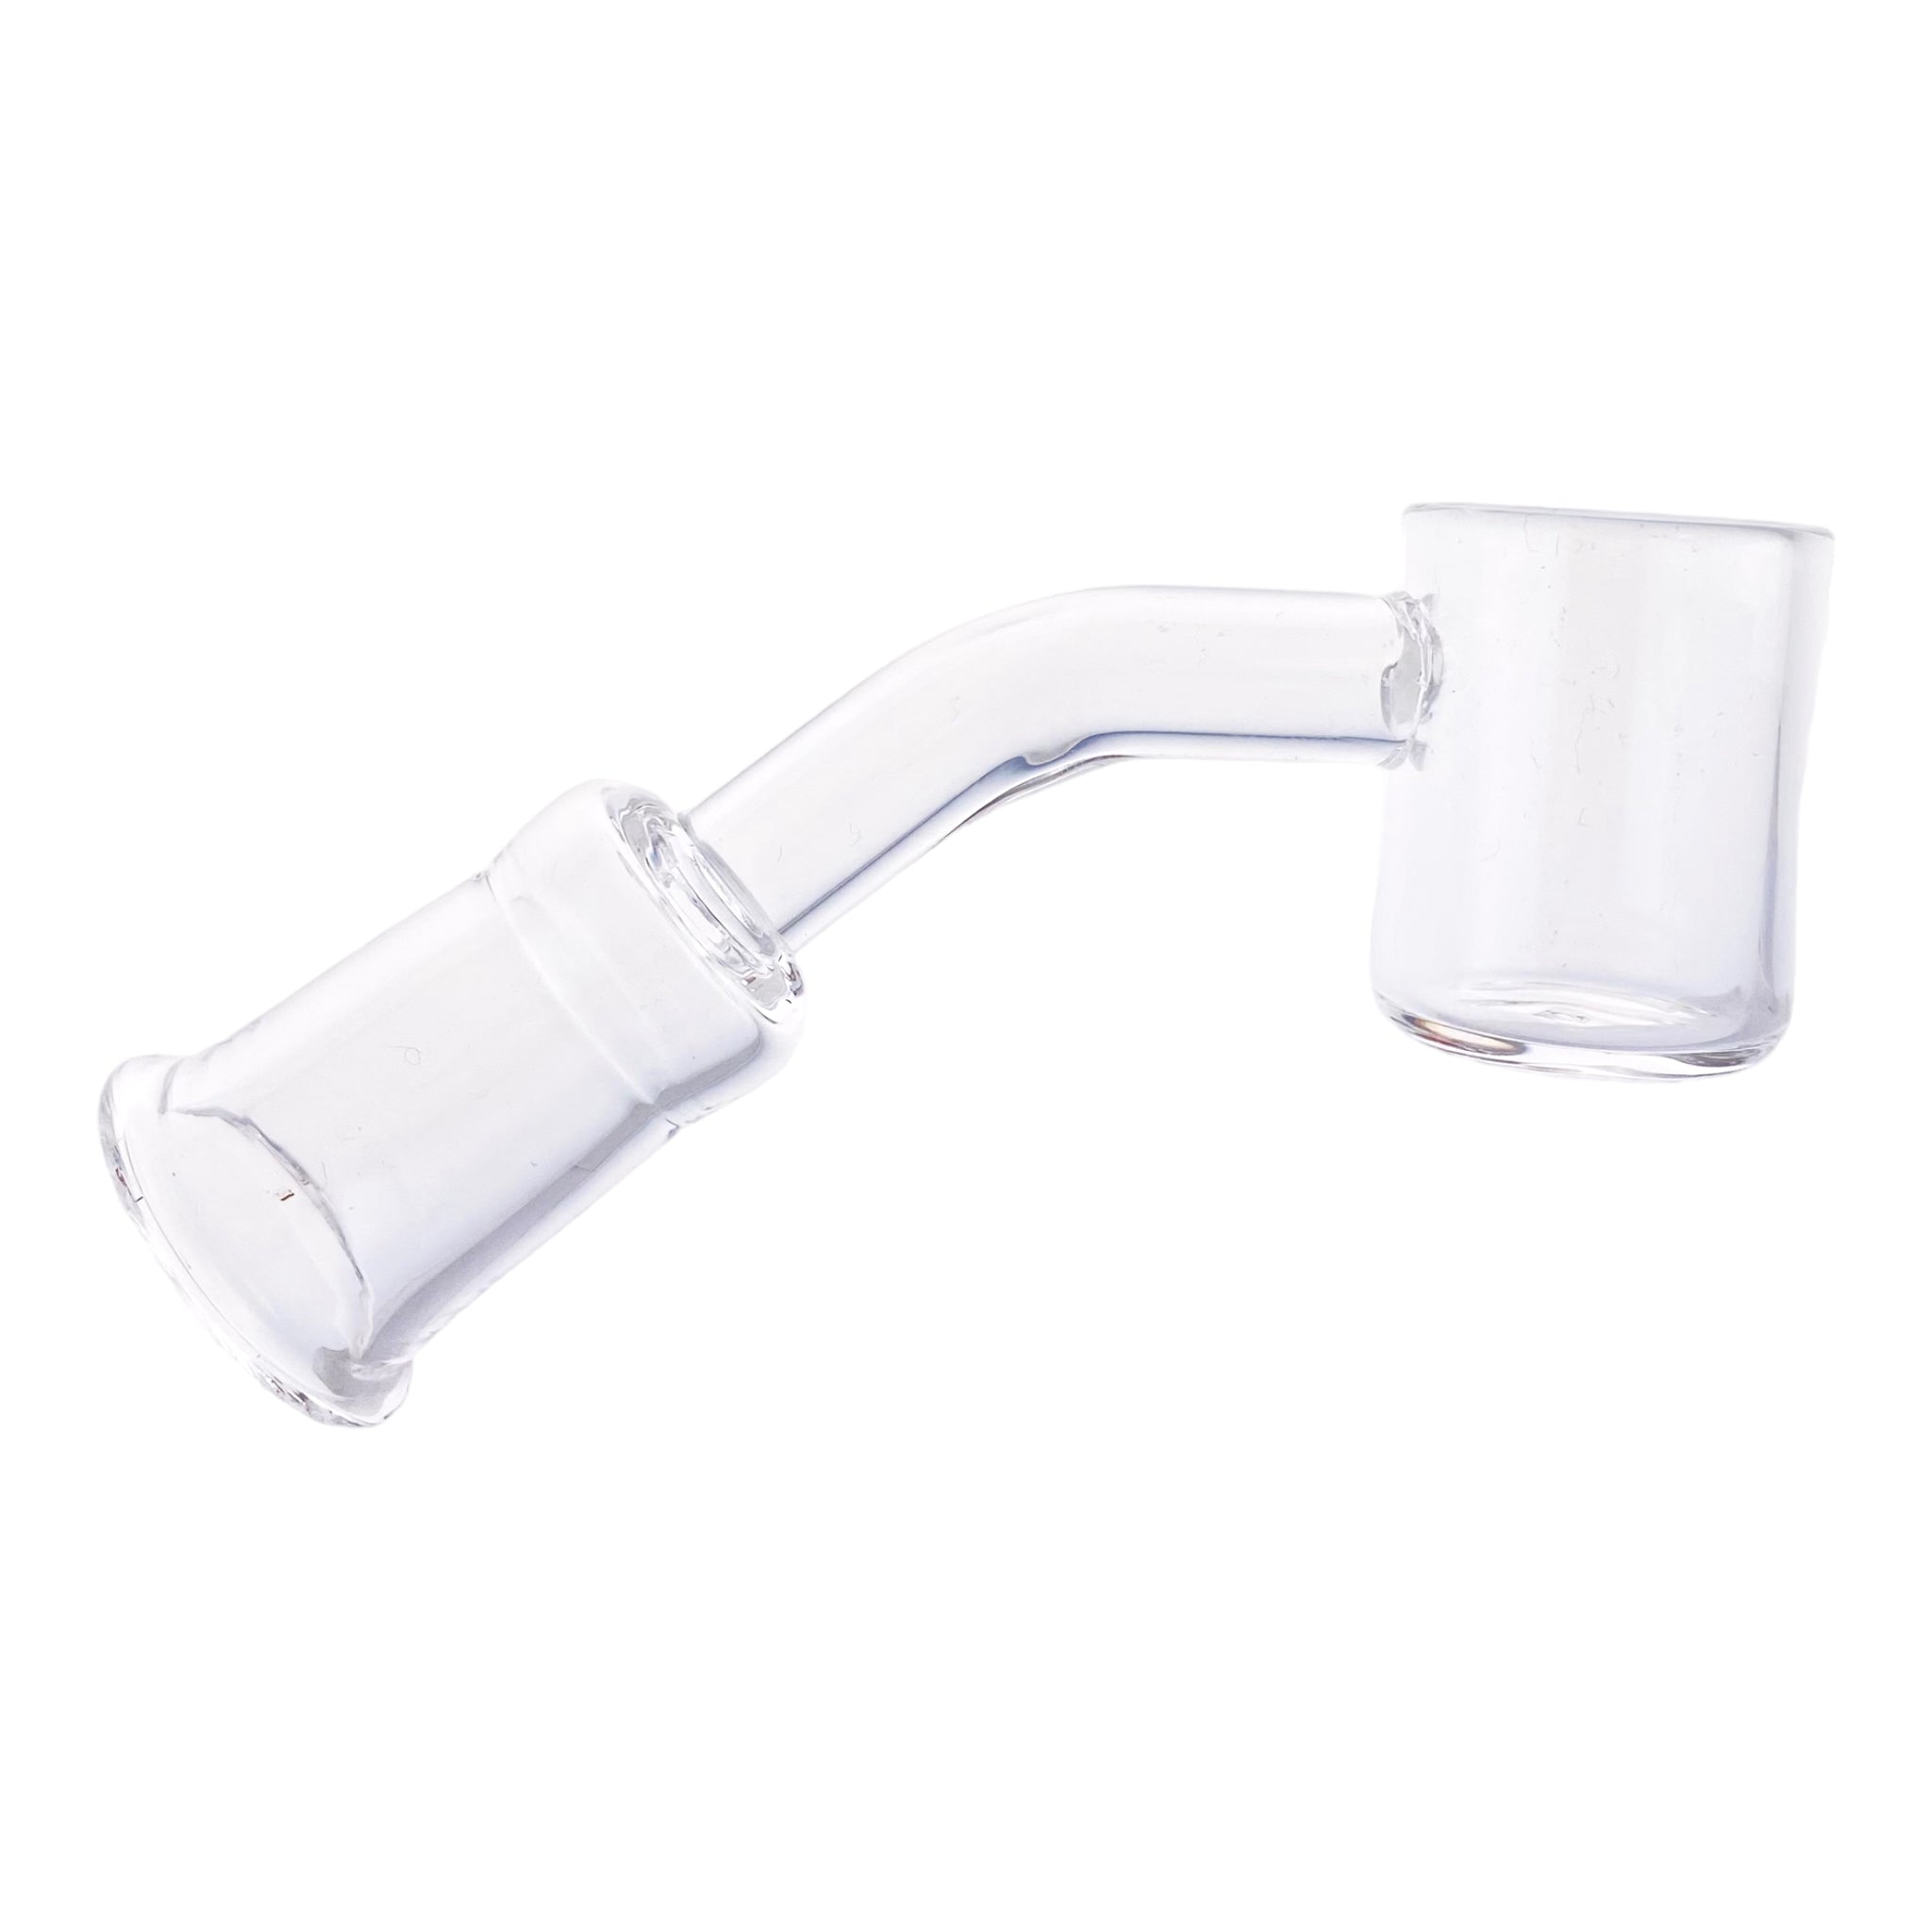 14mm Quartz Banger With 45 Degree Female Fitting And 20mm Wide Bucket